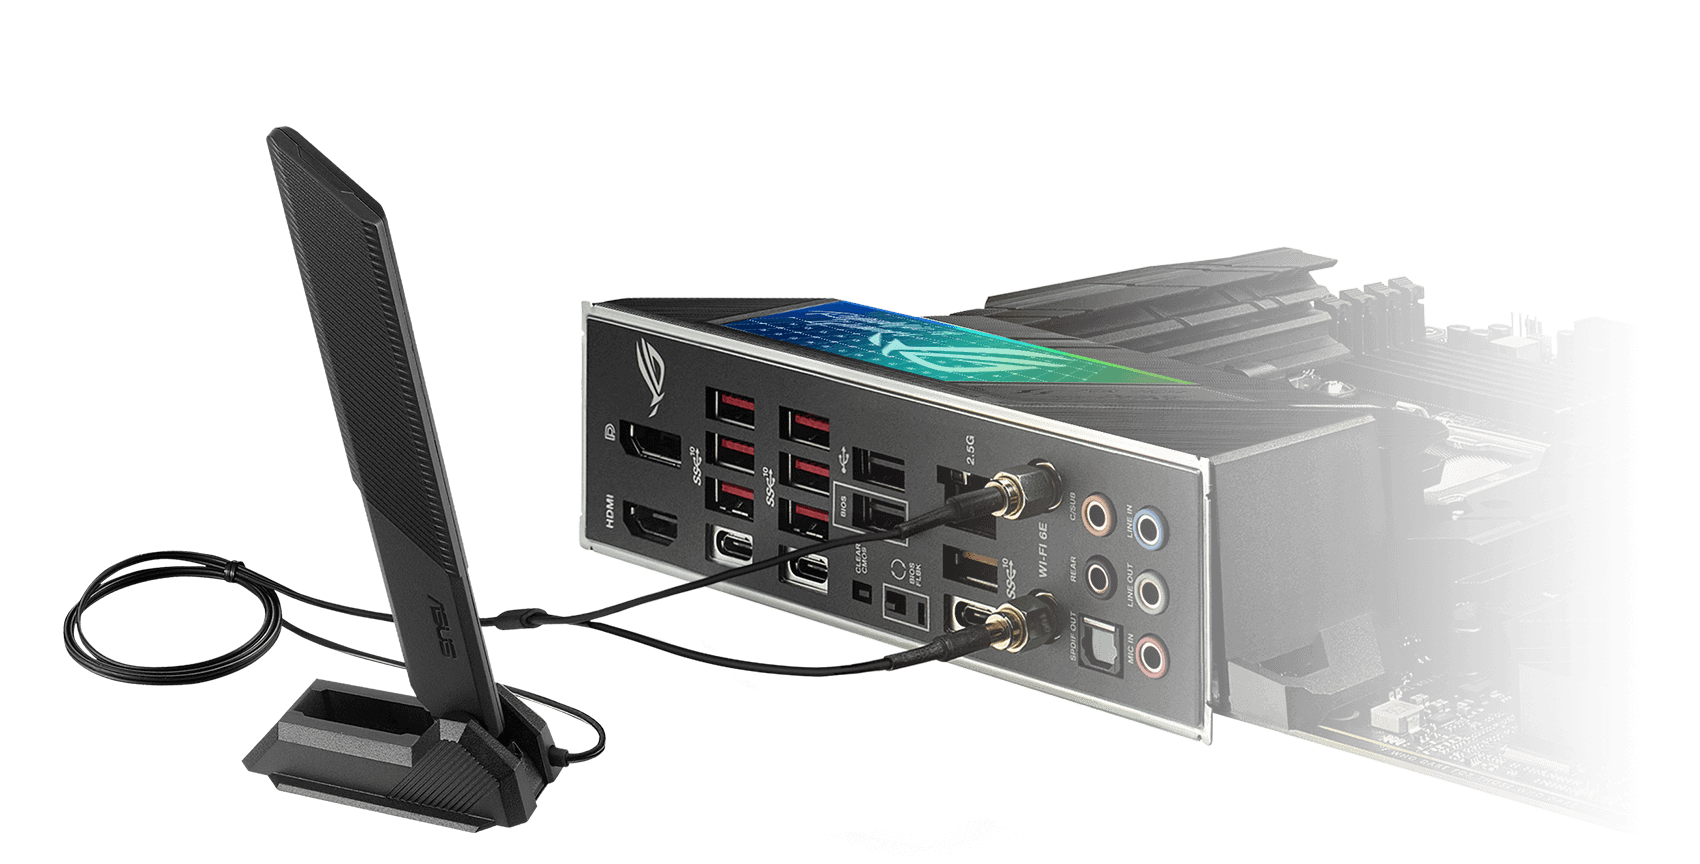 ROG Strix X670E-F features WiFi 6E, an included antenna, and 2.5 Gb ethernet